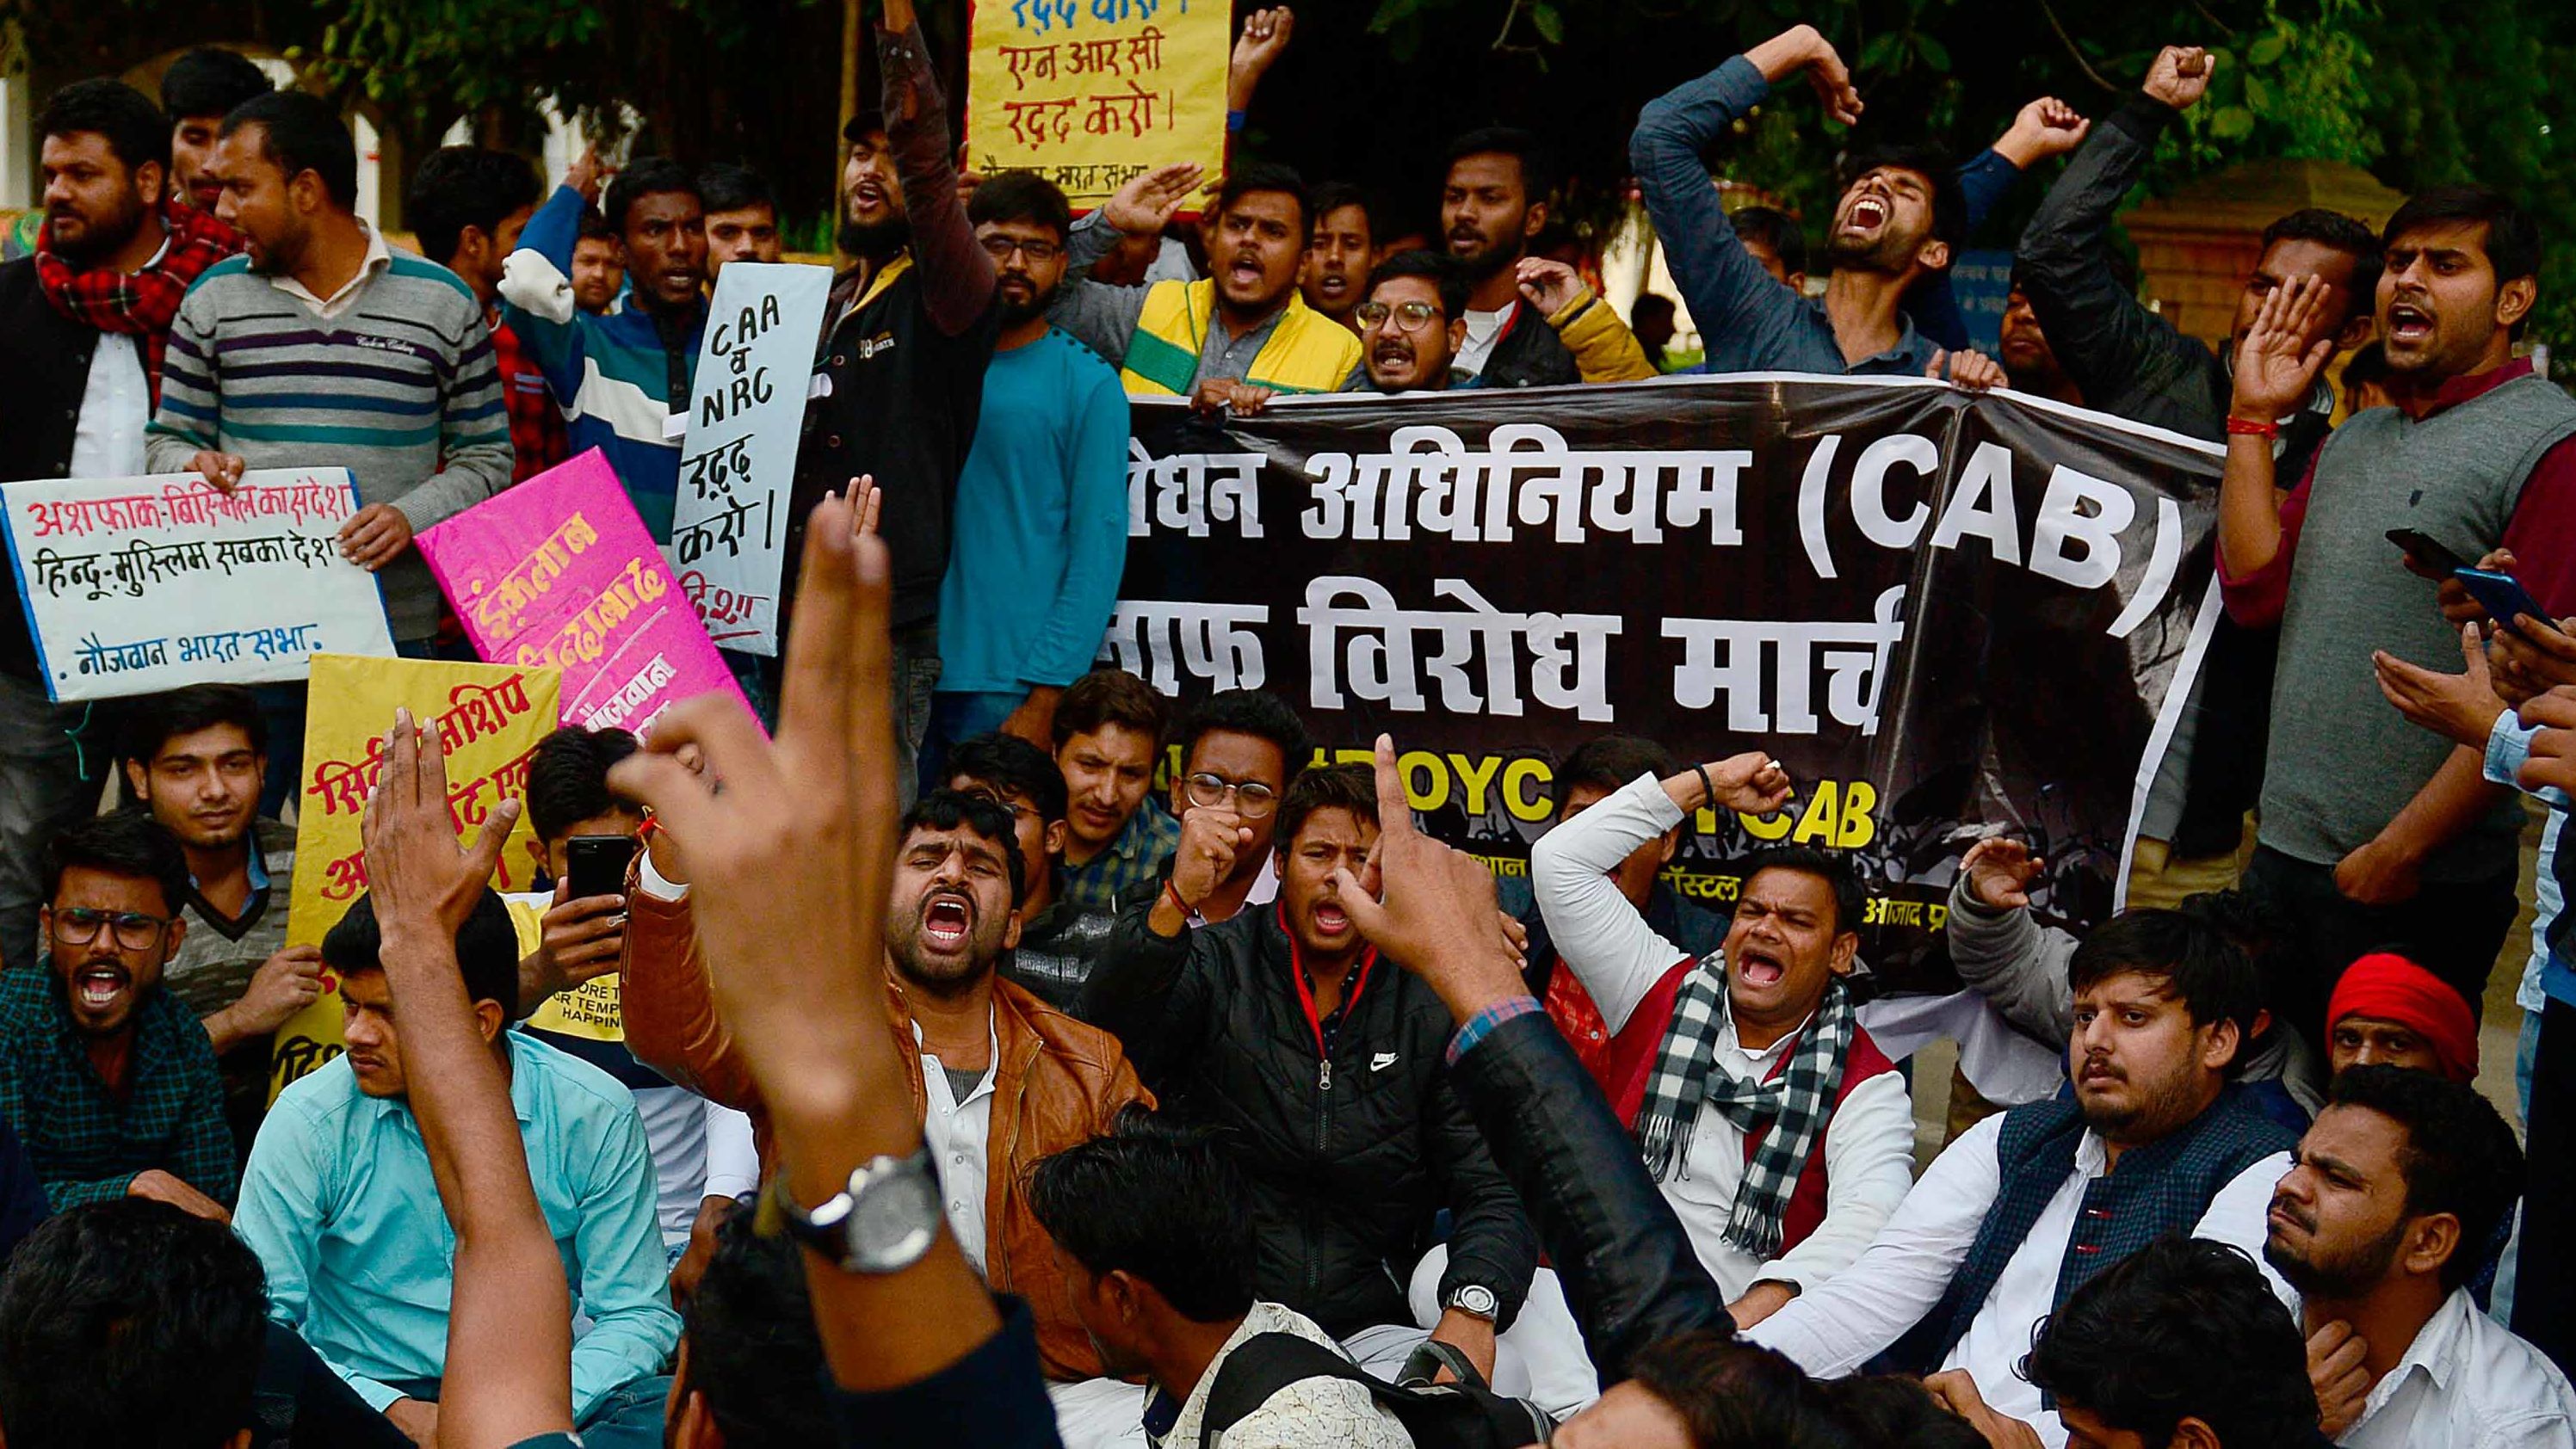 Students and activists protest outside the Allahabad University campus in Allahabad, India, on Monday, December 16.